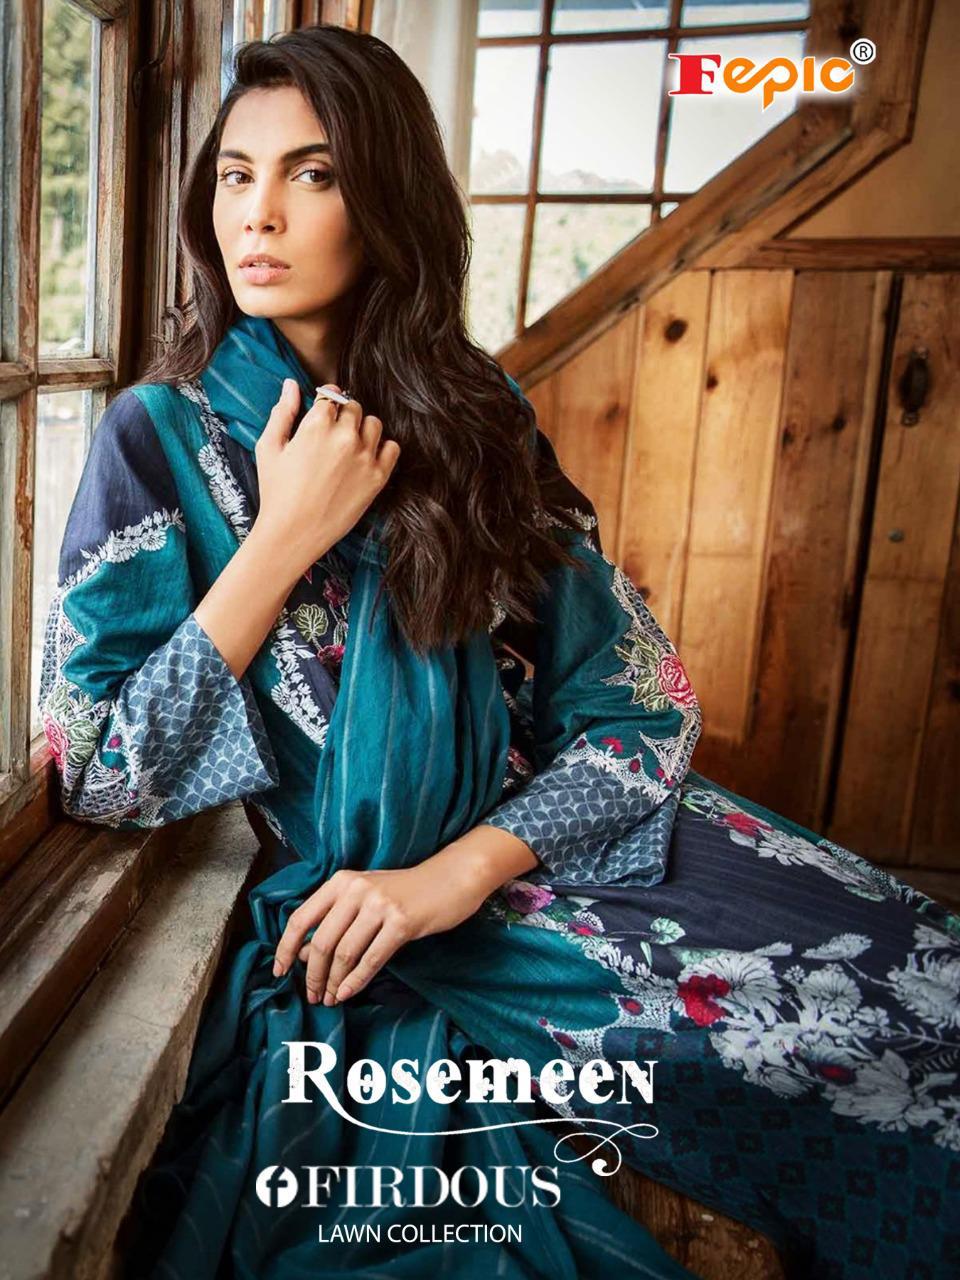 Fepic Rosemeen Firdous Lawn Collection Pure Cambric Cotton P...